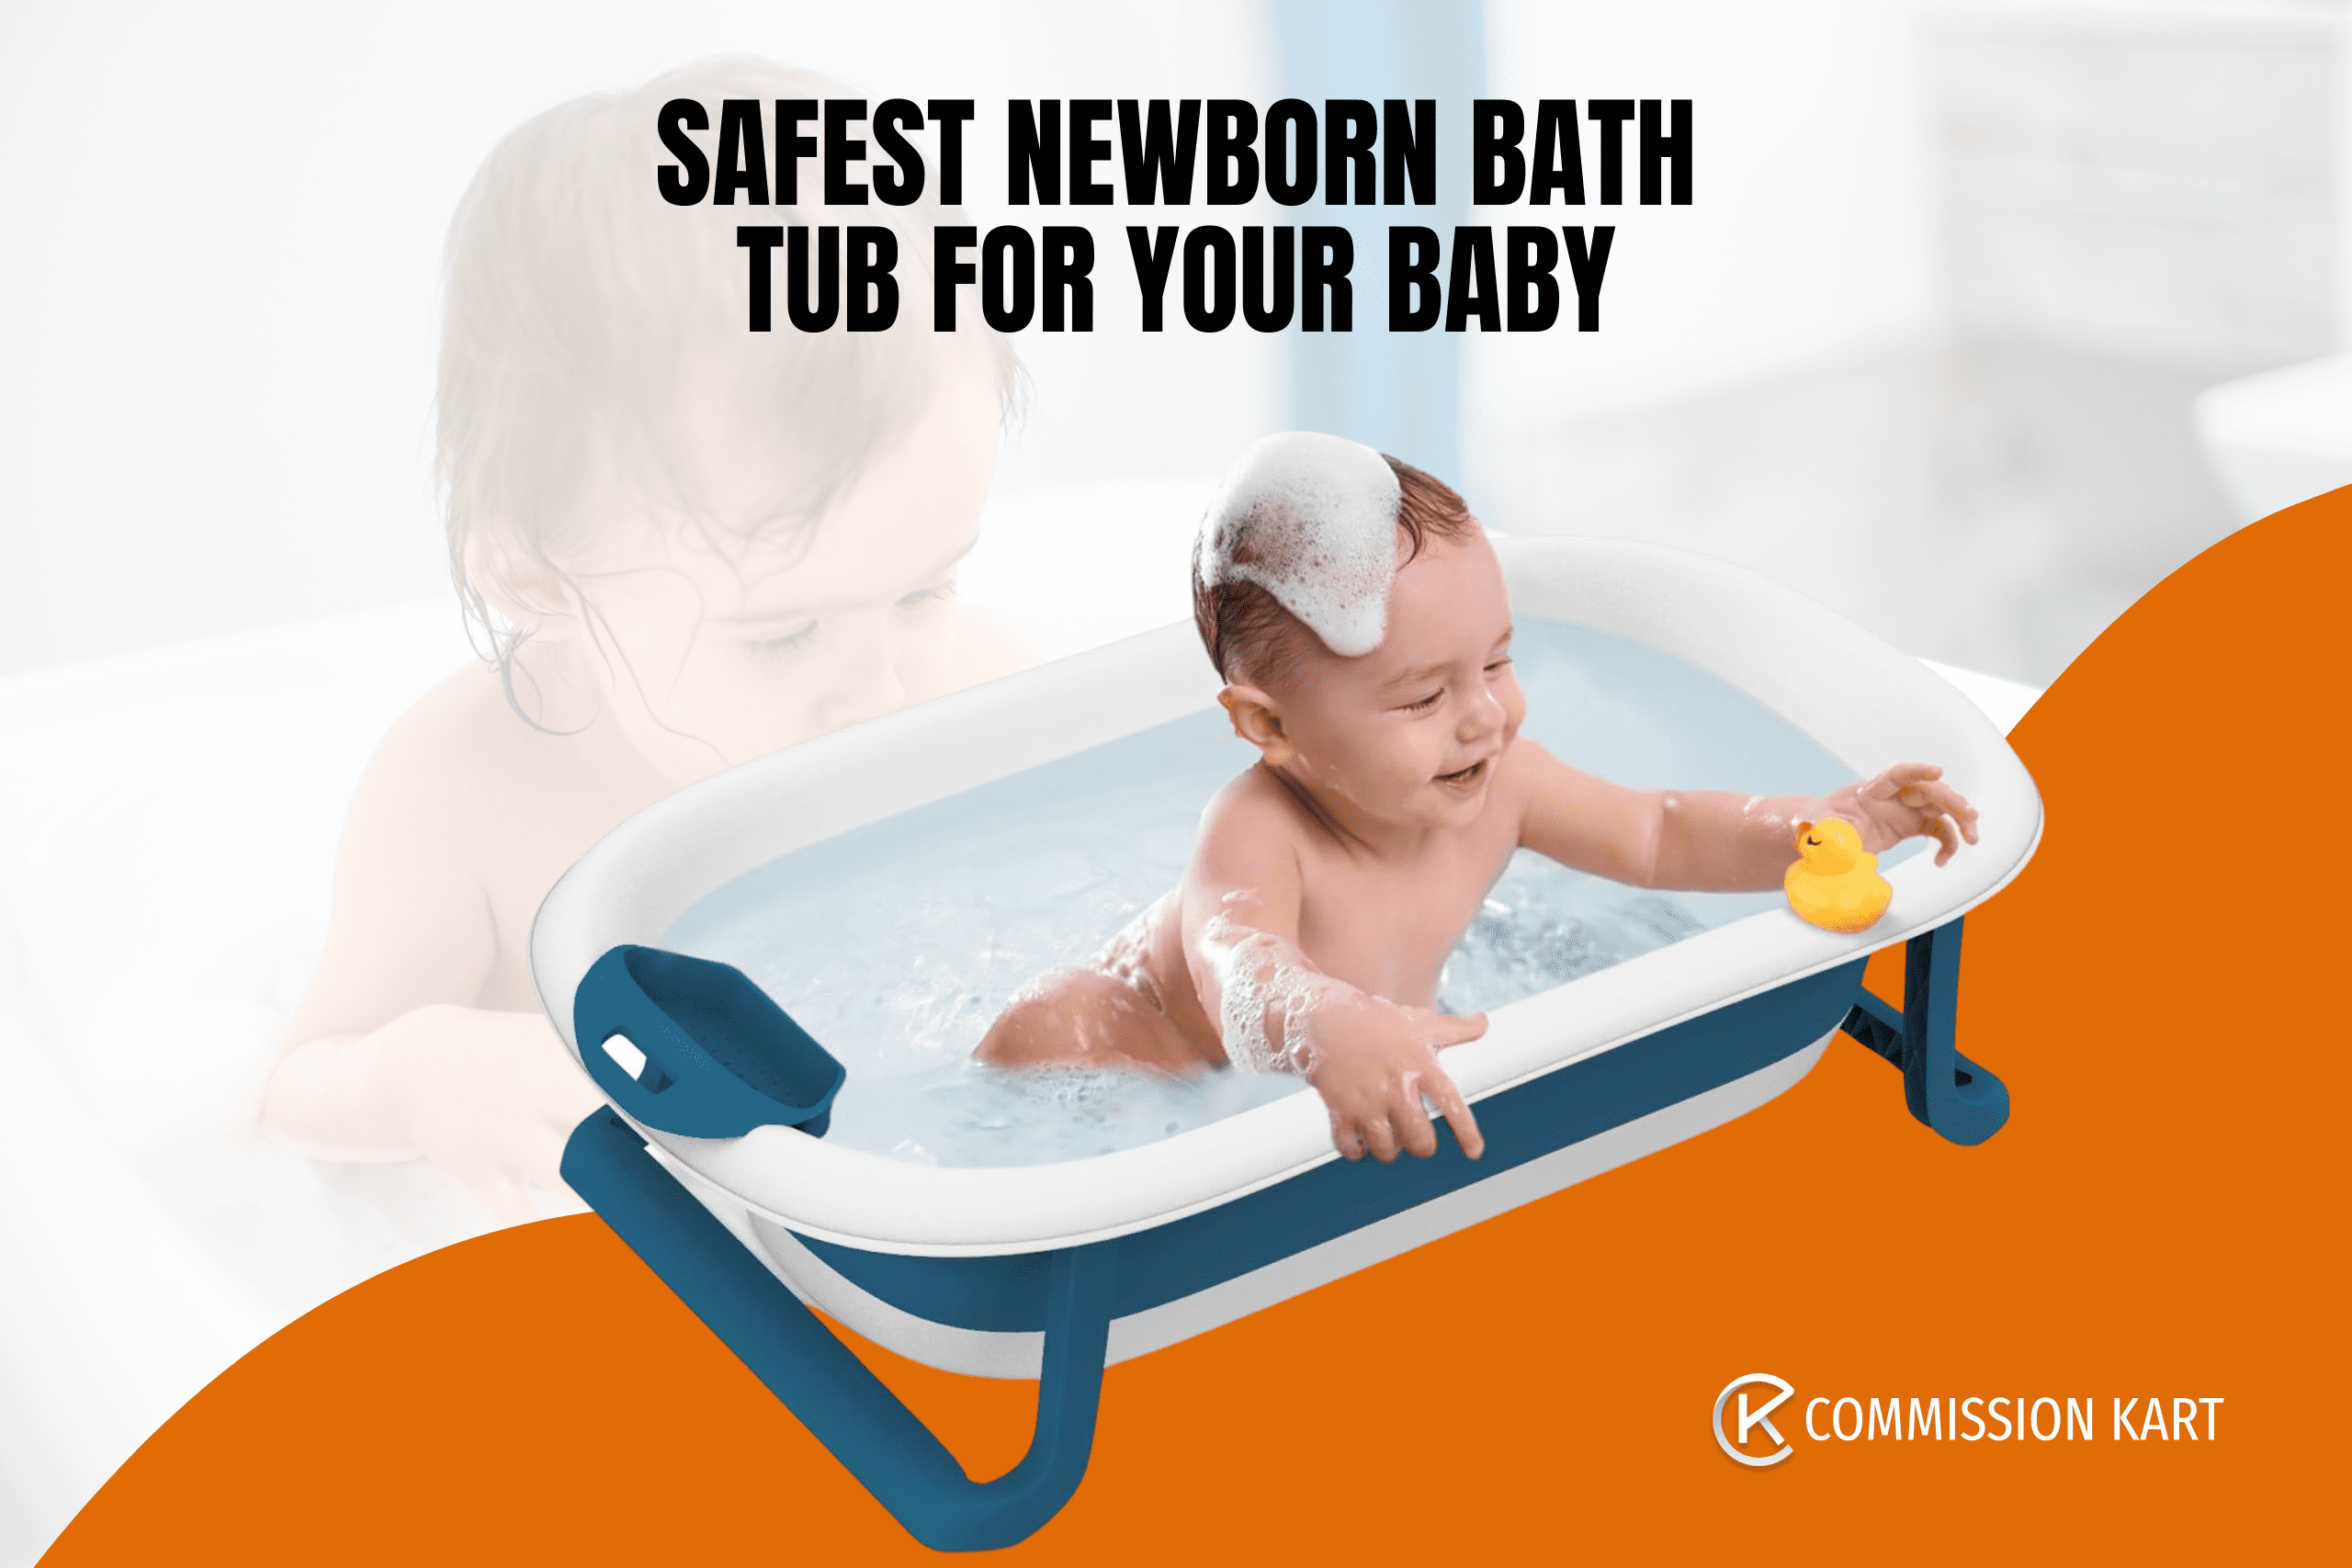 The Complete Guide to Choosing the Safest Newborn Bath Tub for Your Baby